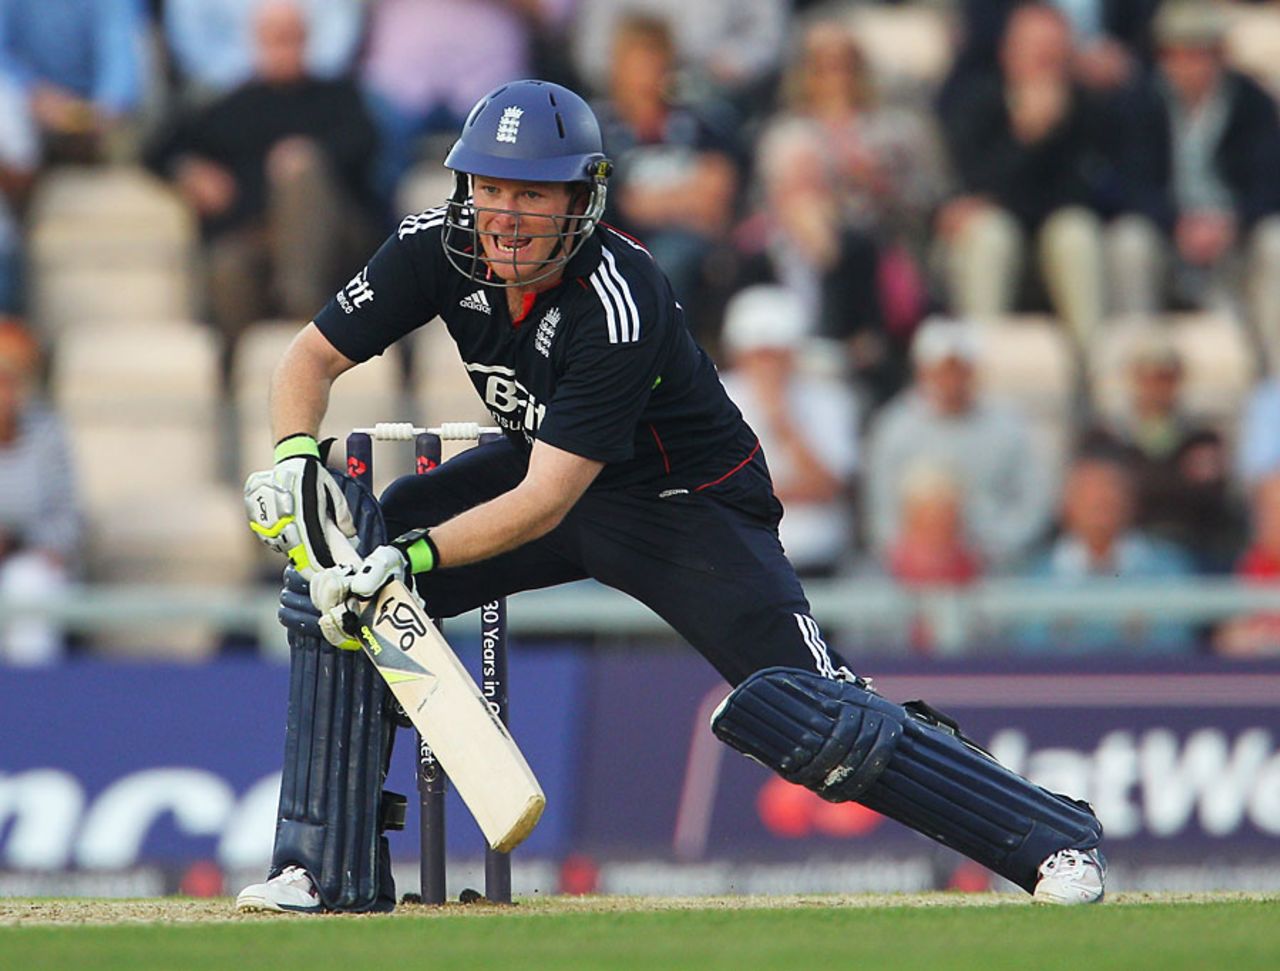 Eoin Morgan showed he cut set a one-day total as well as chase one, England v Pakistan, 5th ODI, Rose Bowl, September 22, 2010